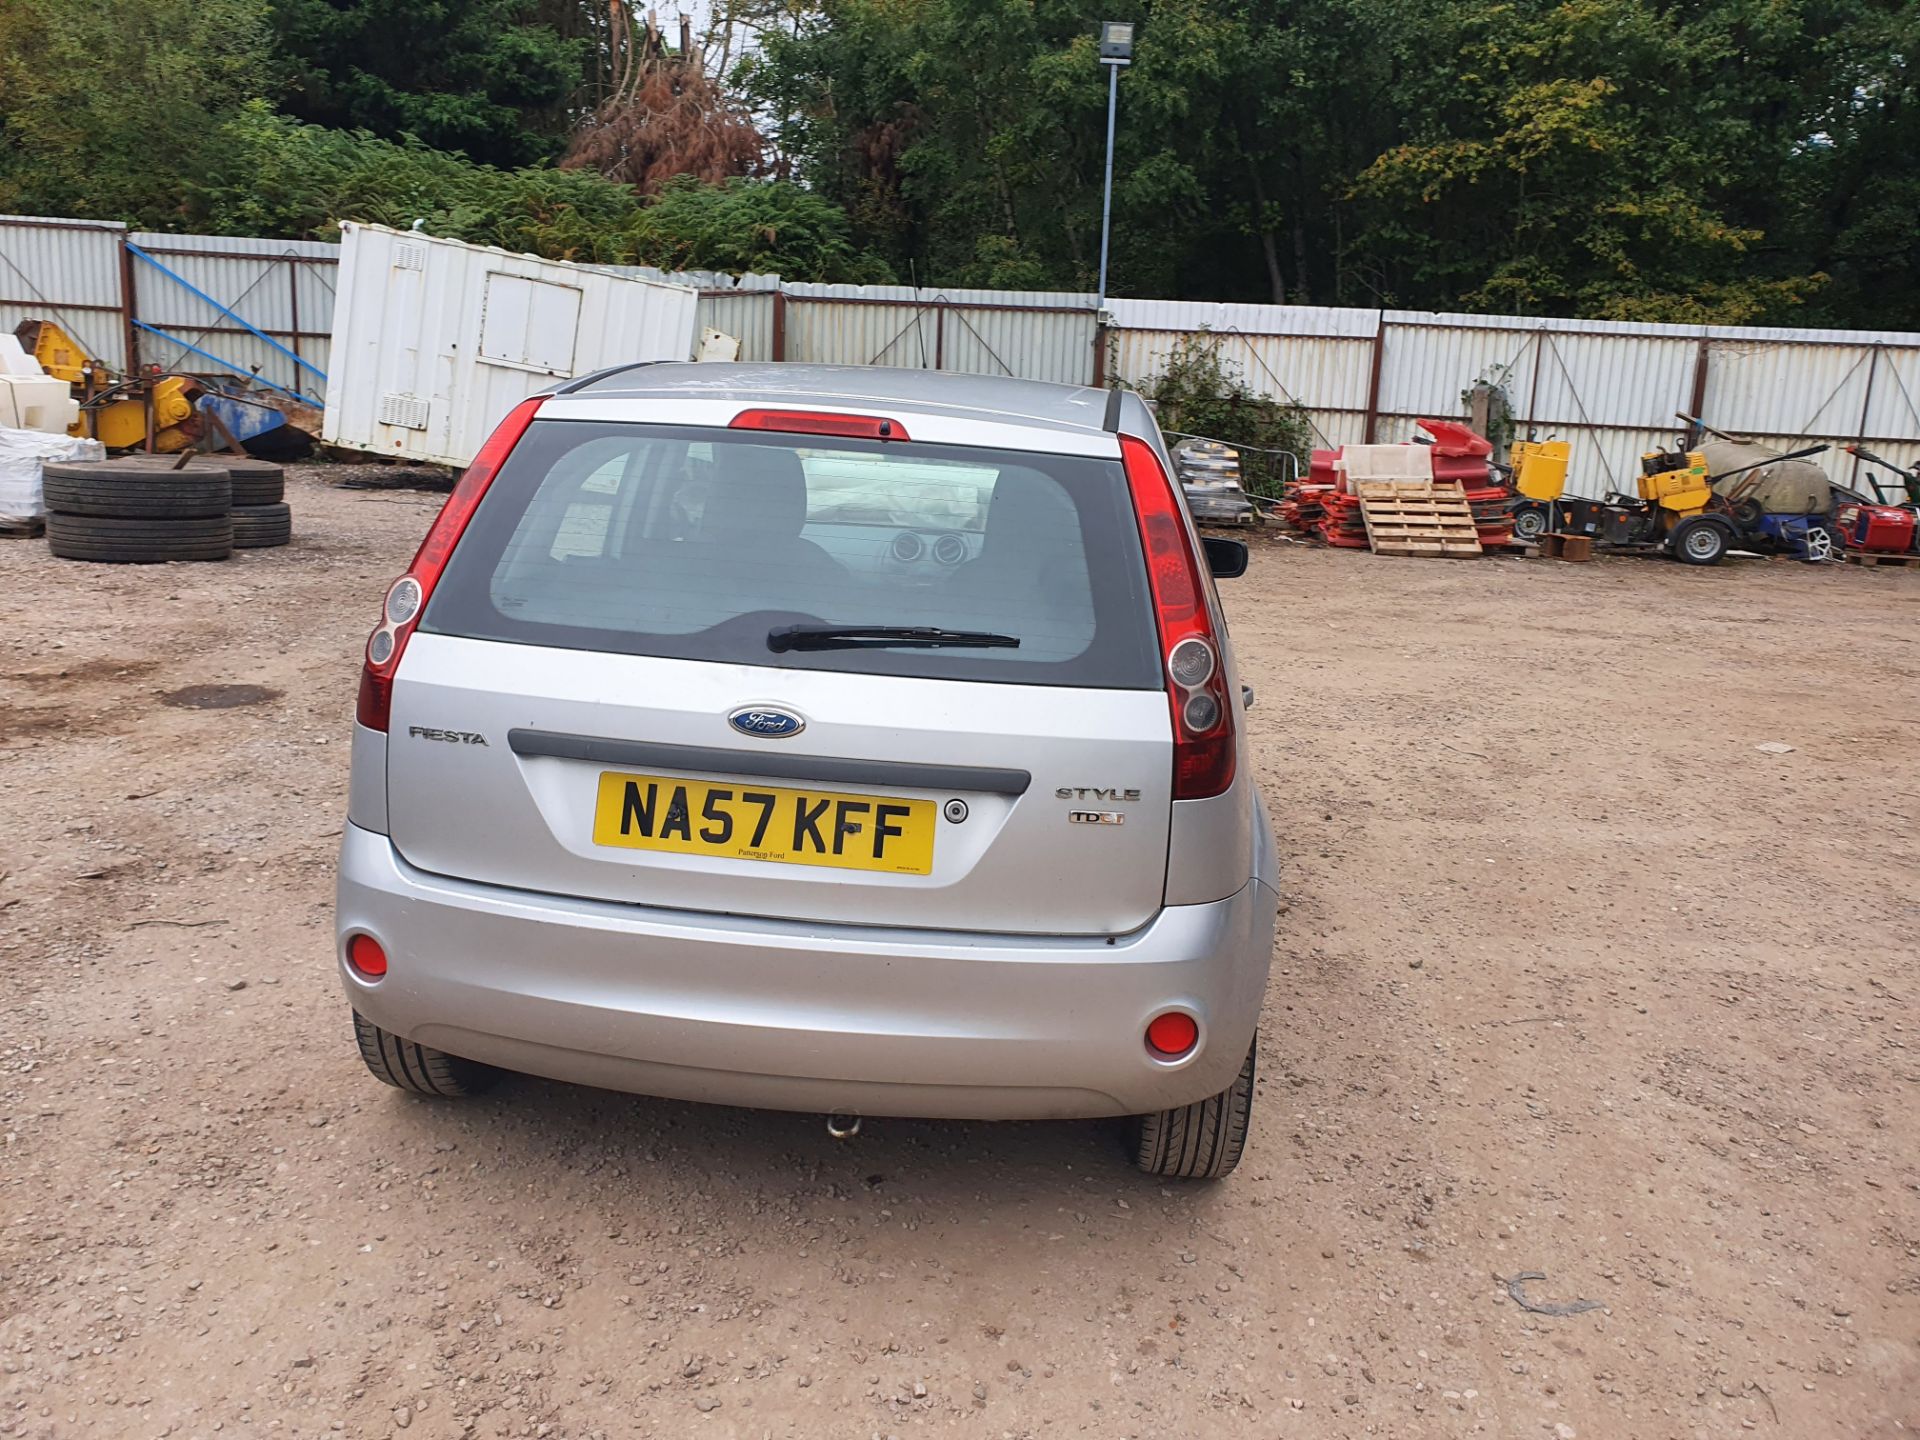 07/57 FORD FIESTA STYLE TDCI - 1399cc 5dr Hatchback (Silver) - Image 22 of 43